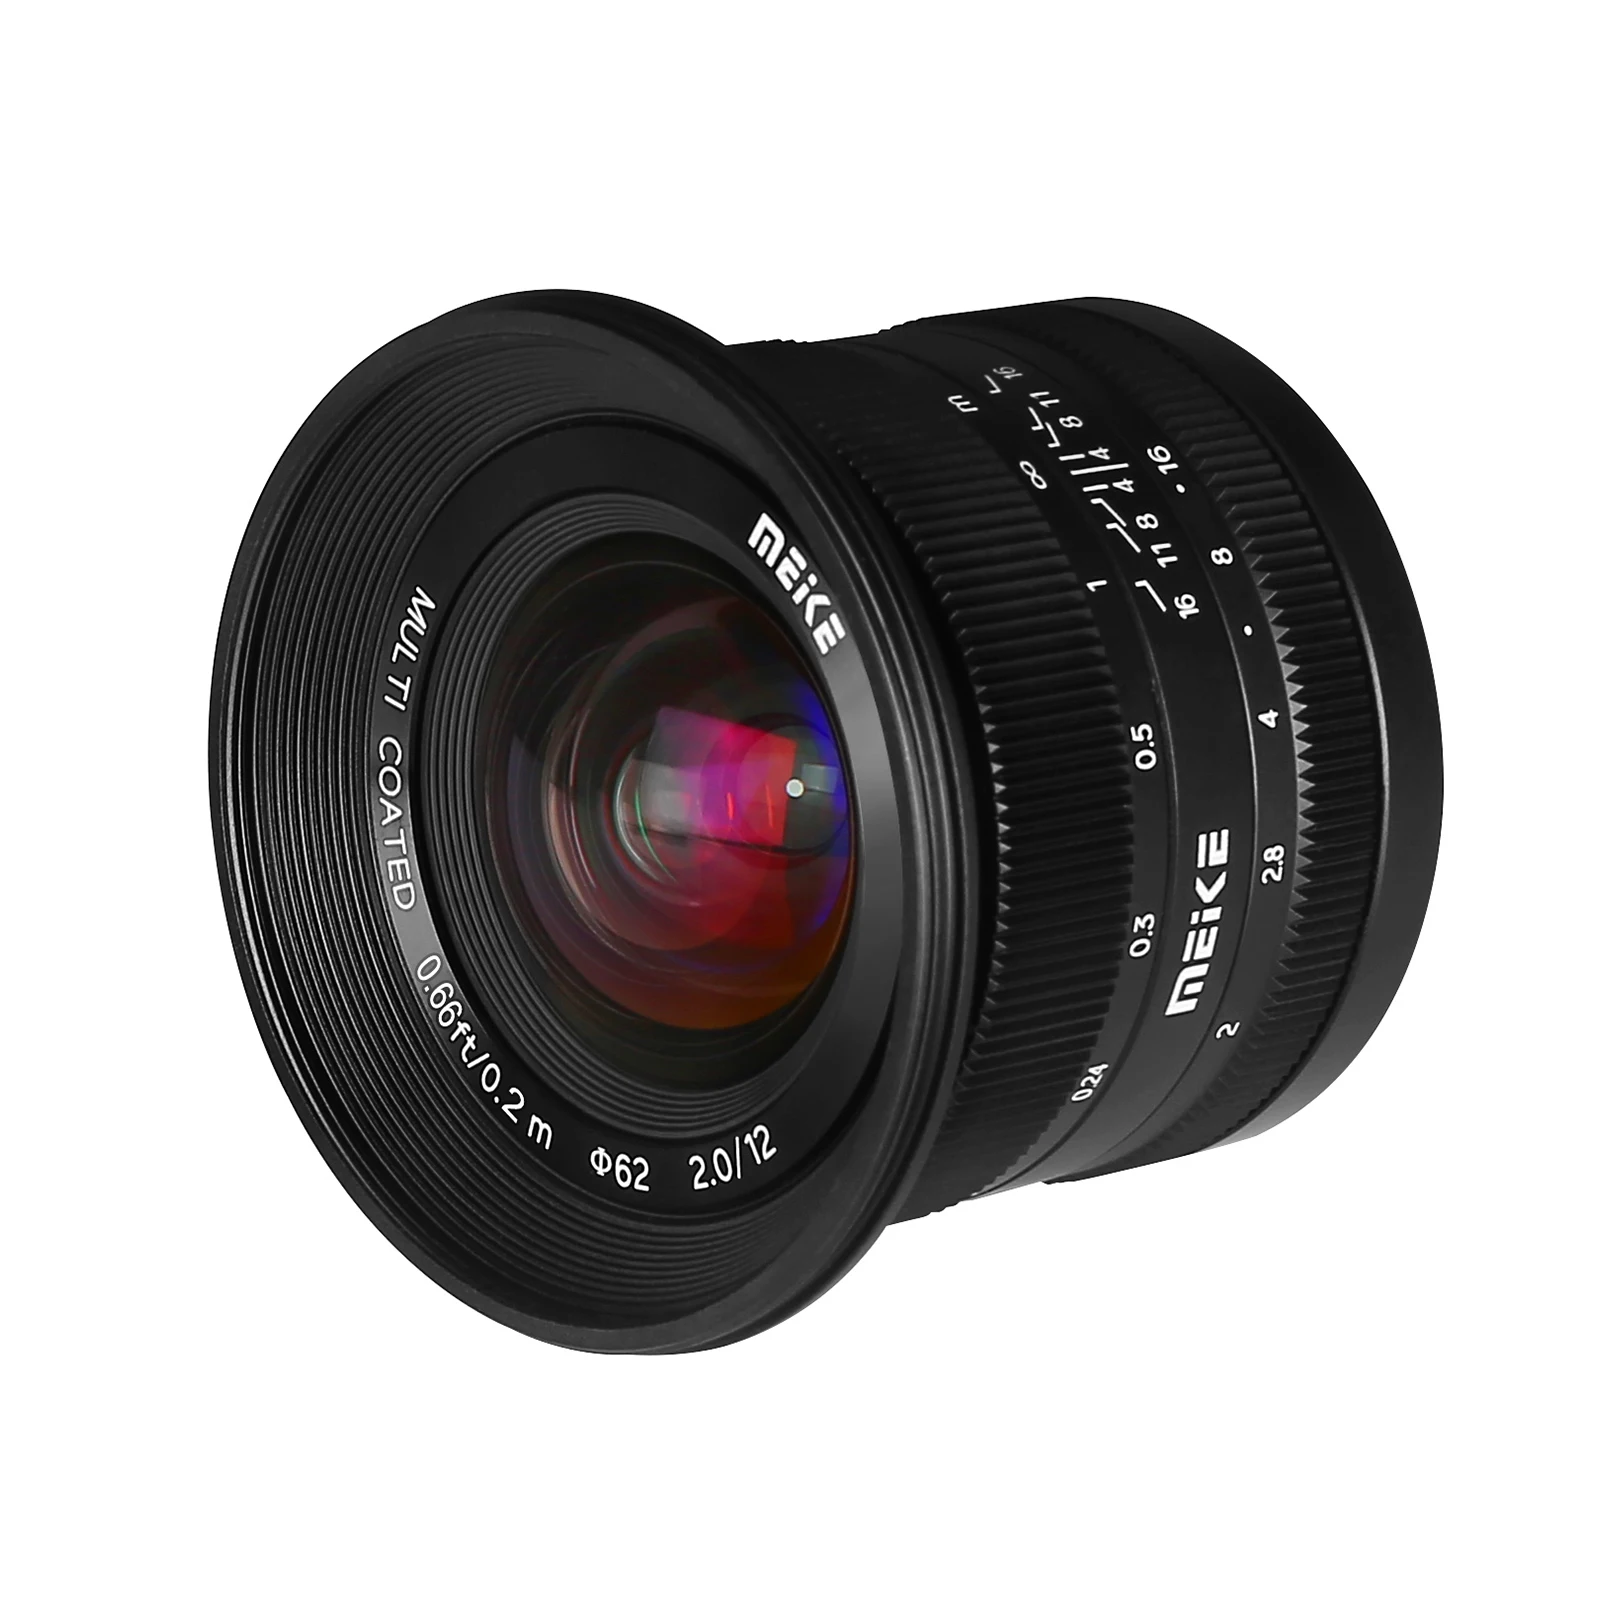 Meike 12mm F2.0 Aps-c Manual Focus Wide Angle Lens Compatible With 